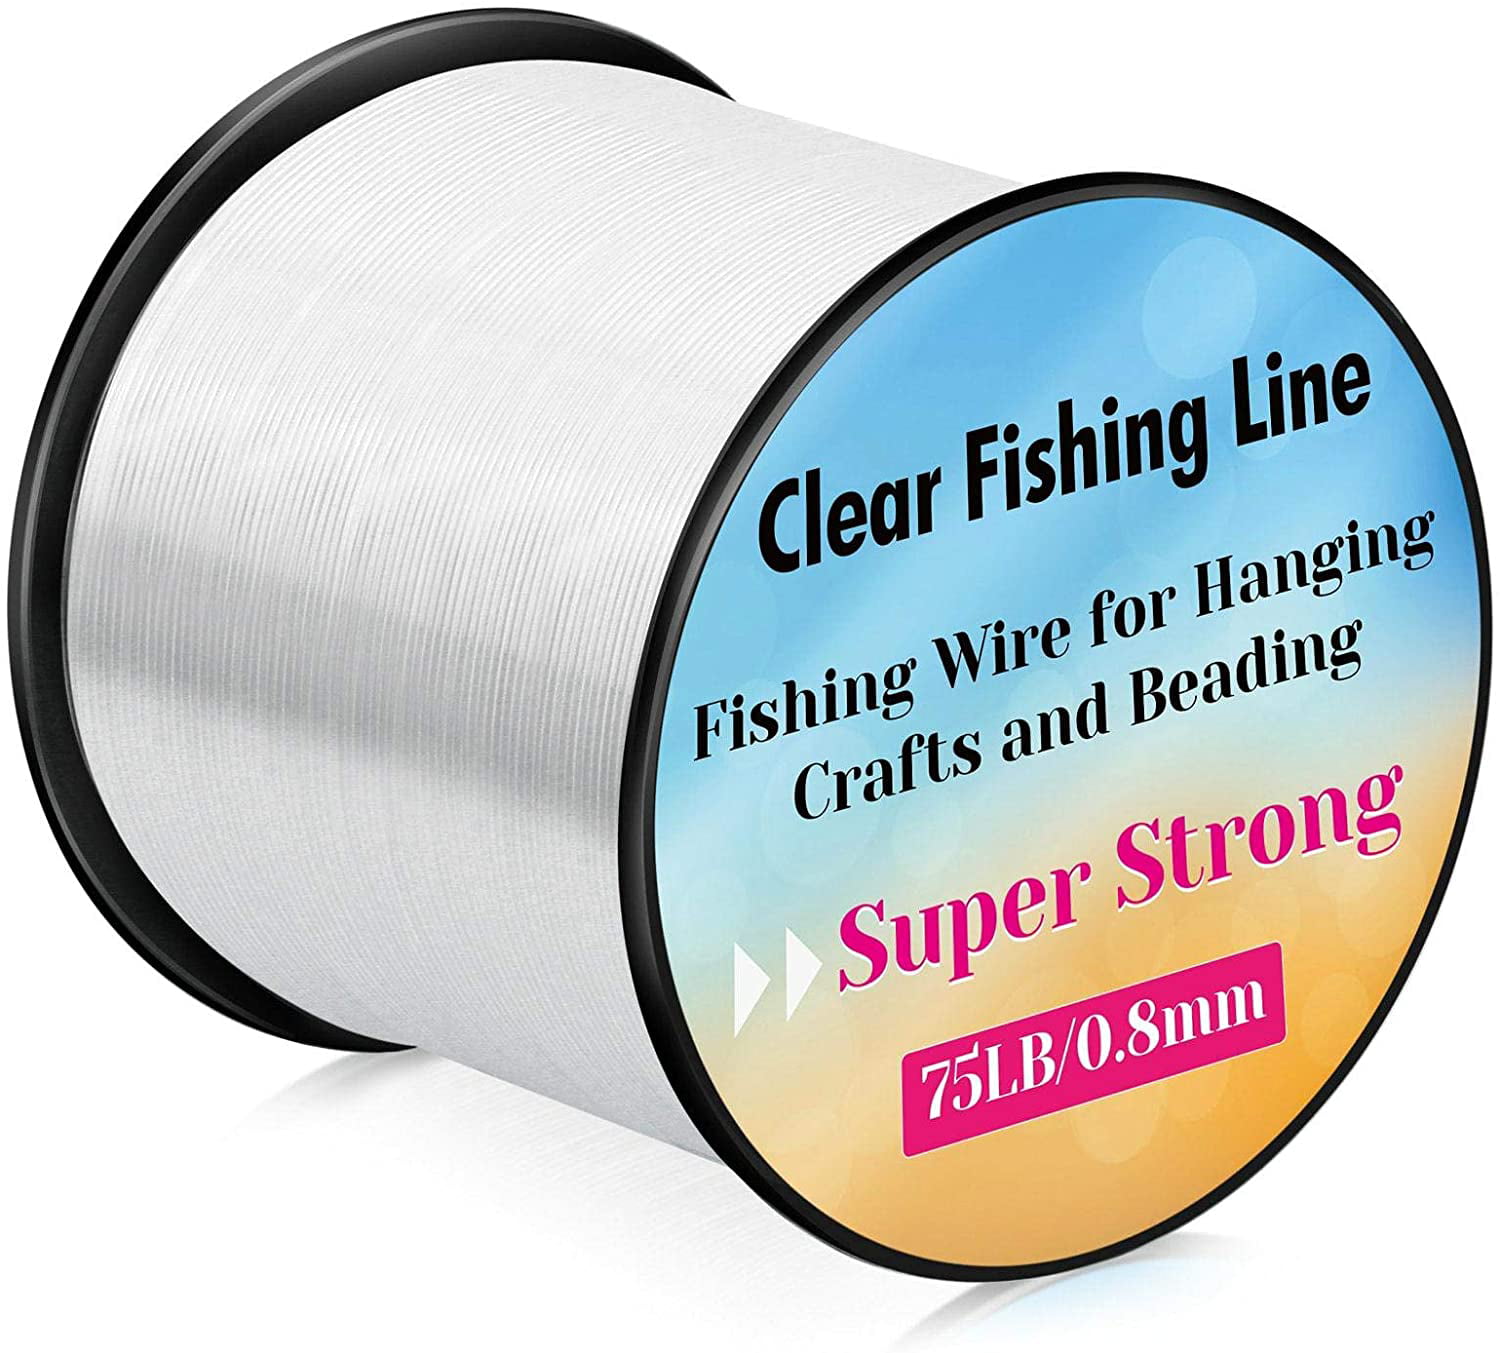 Acejoz 656FT Fishing Line Clear Invisible Hanging Wire Strong Nylon String Supports 40 Pounds for Balloon Garland Hanging Decorations Clear Fishing Wire 